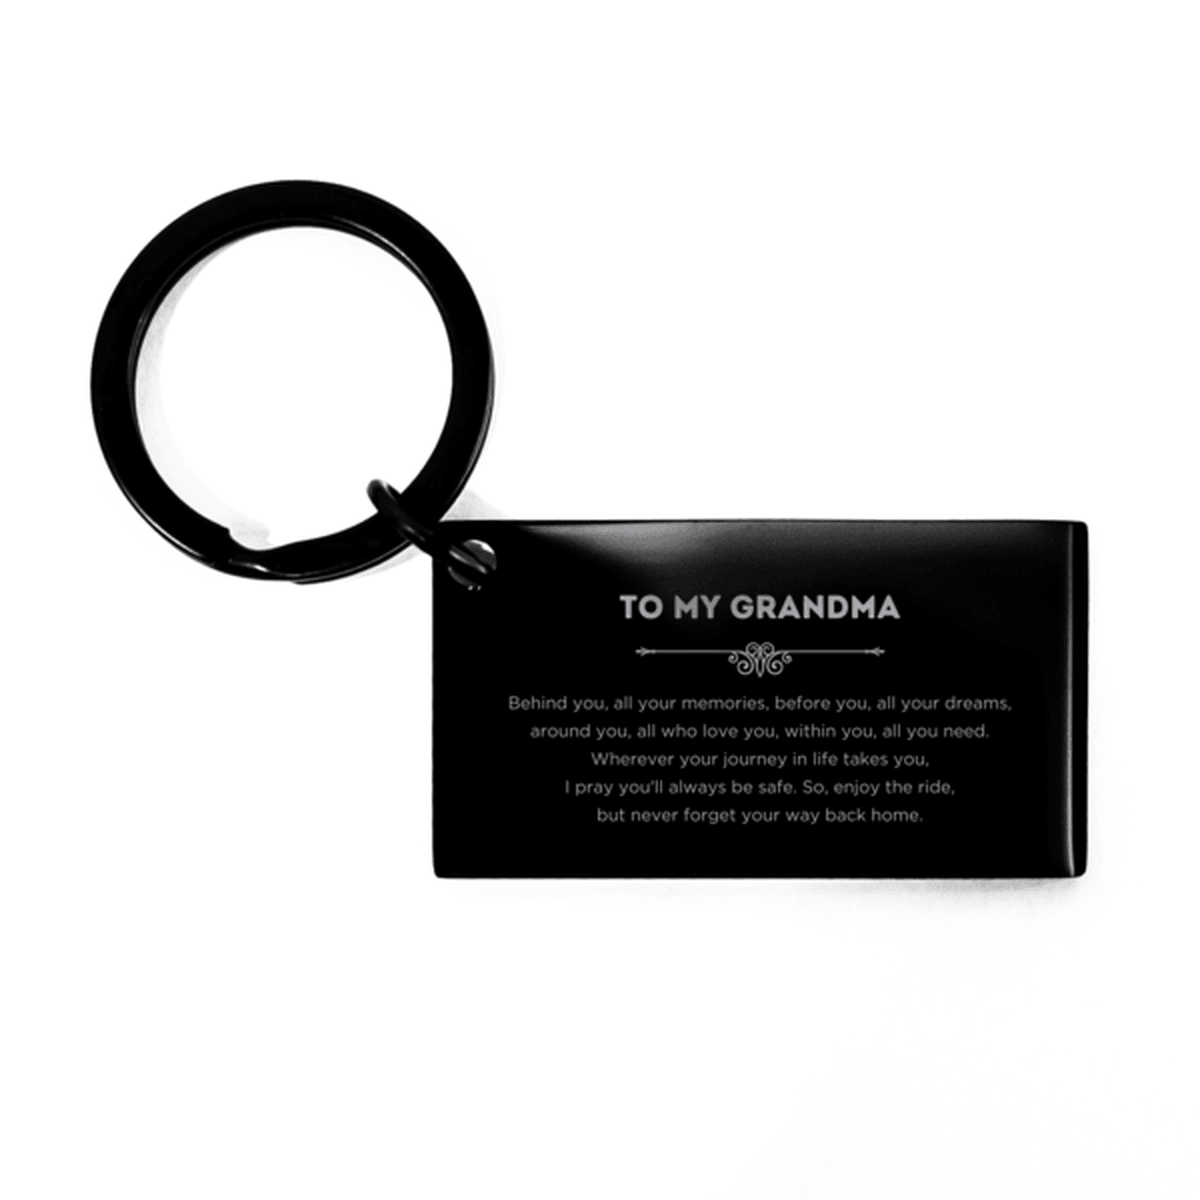 Grandma Keychain Birthday Christmas Unique Gifts Behind you, all your memories, before you, all your dreams - Mallard Moon Gift Shop